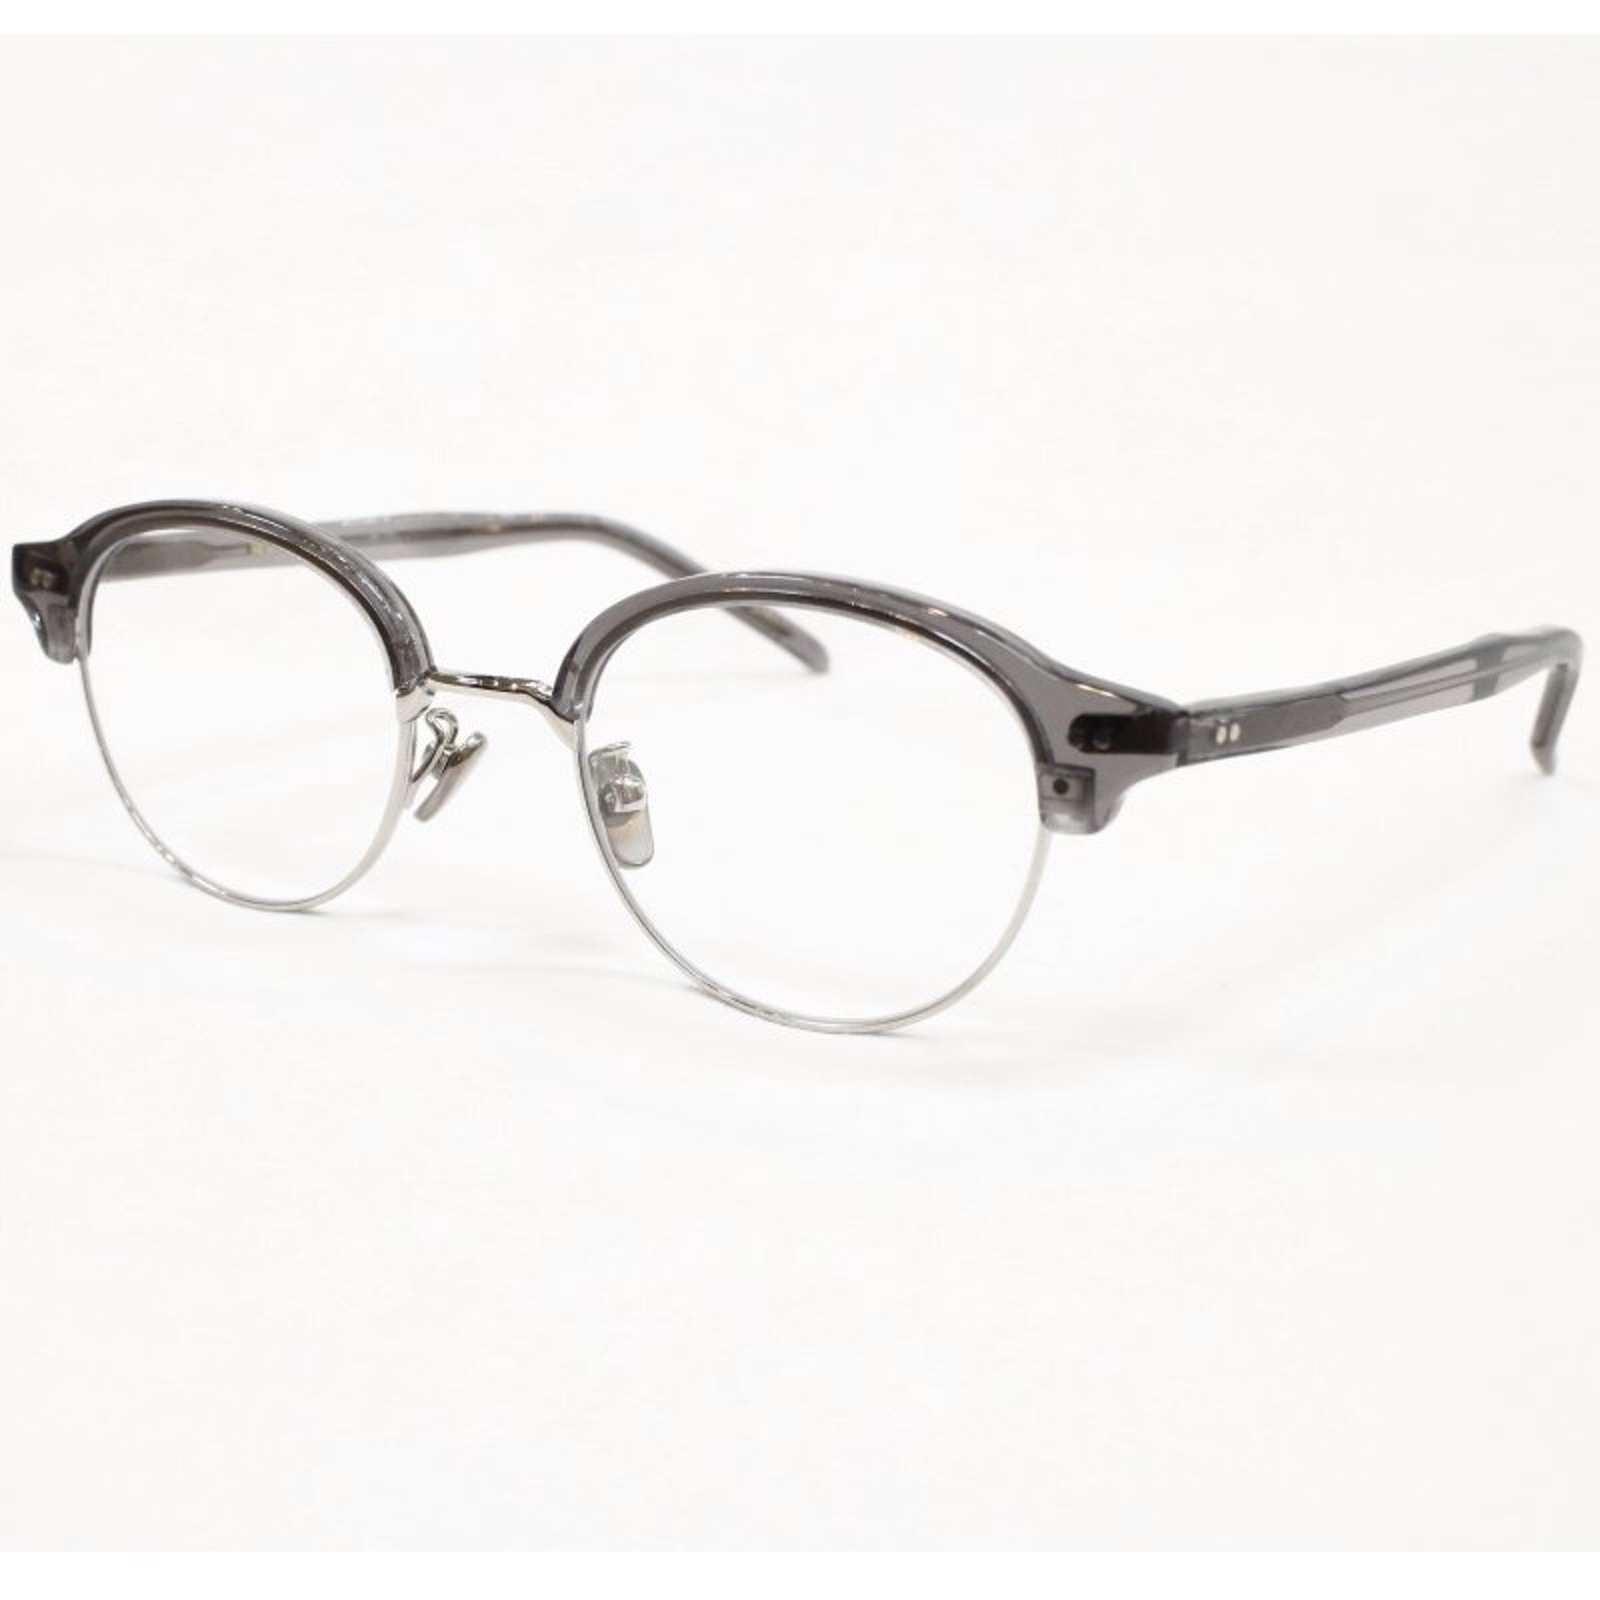 [kearny] サーモント sirmont クリアレンズ：CLEAR GRAY×SILVER